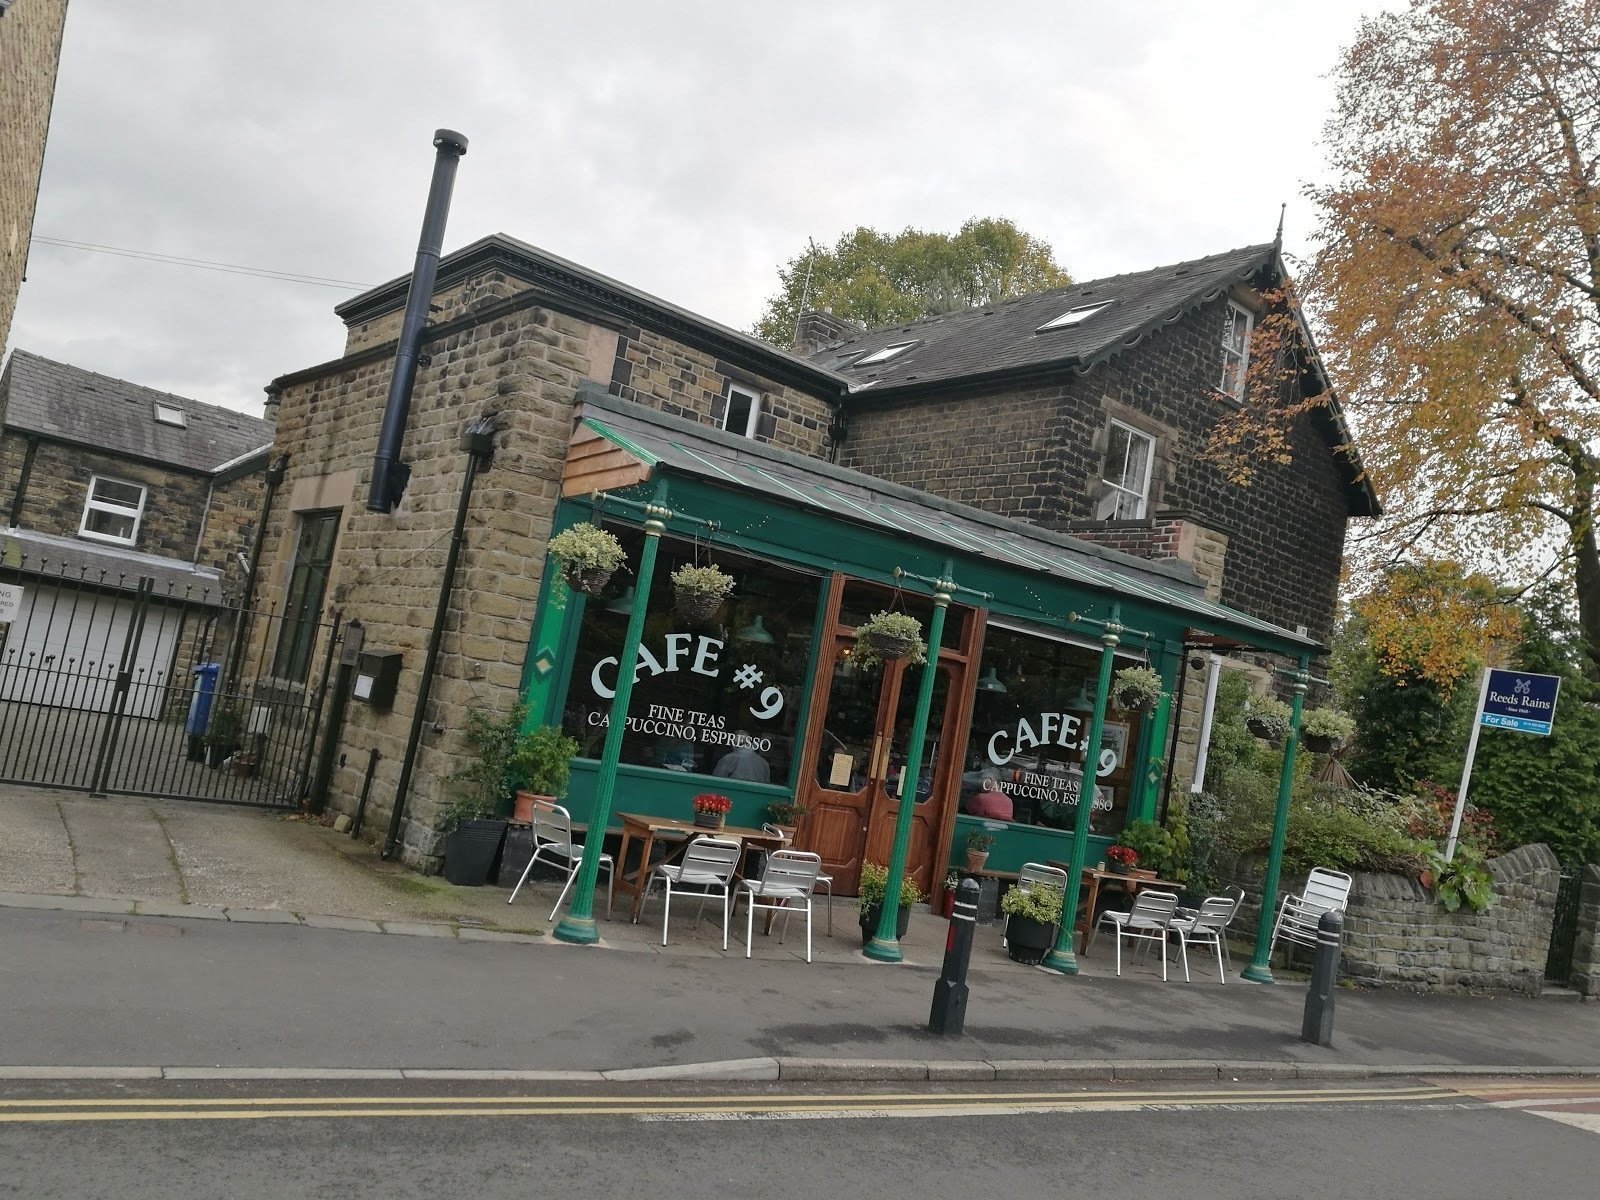 <span class="translation_missing" title="translation missing: en.meta.location_title, location_name: Cafe#9, city: Sheffield">Location Title</span>